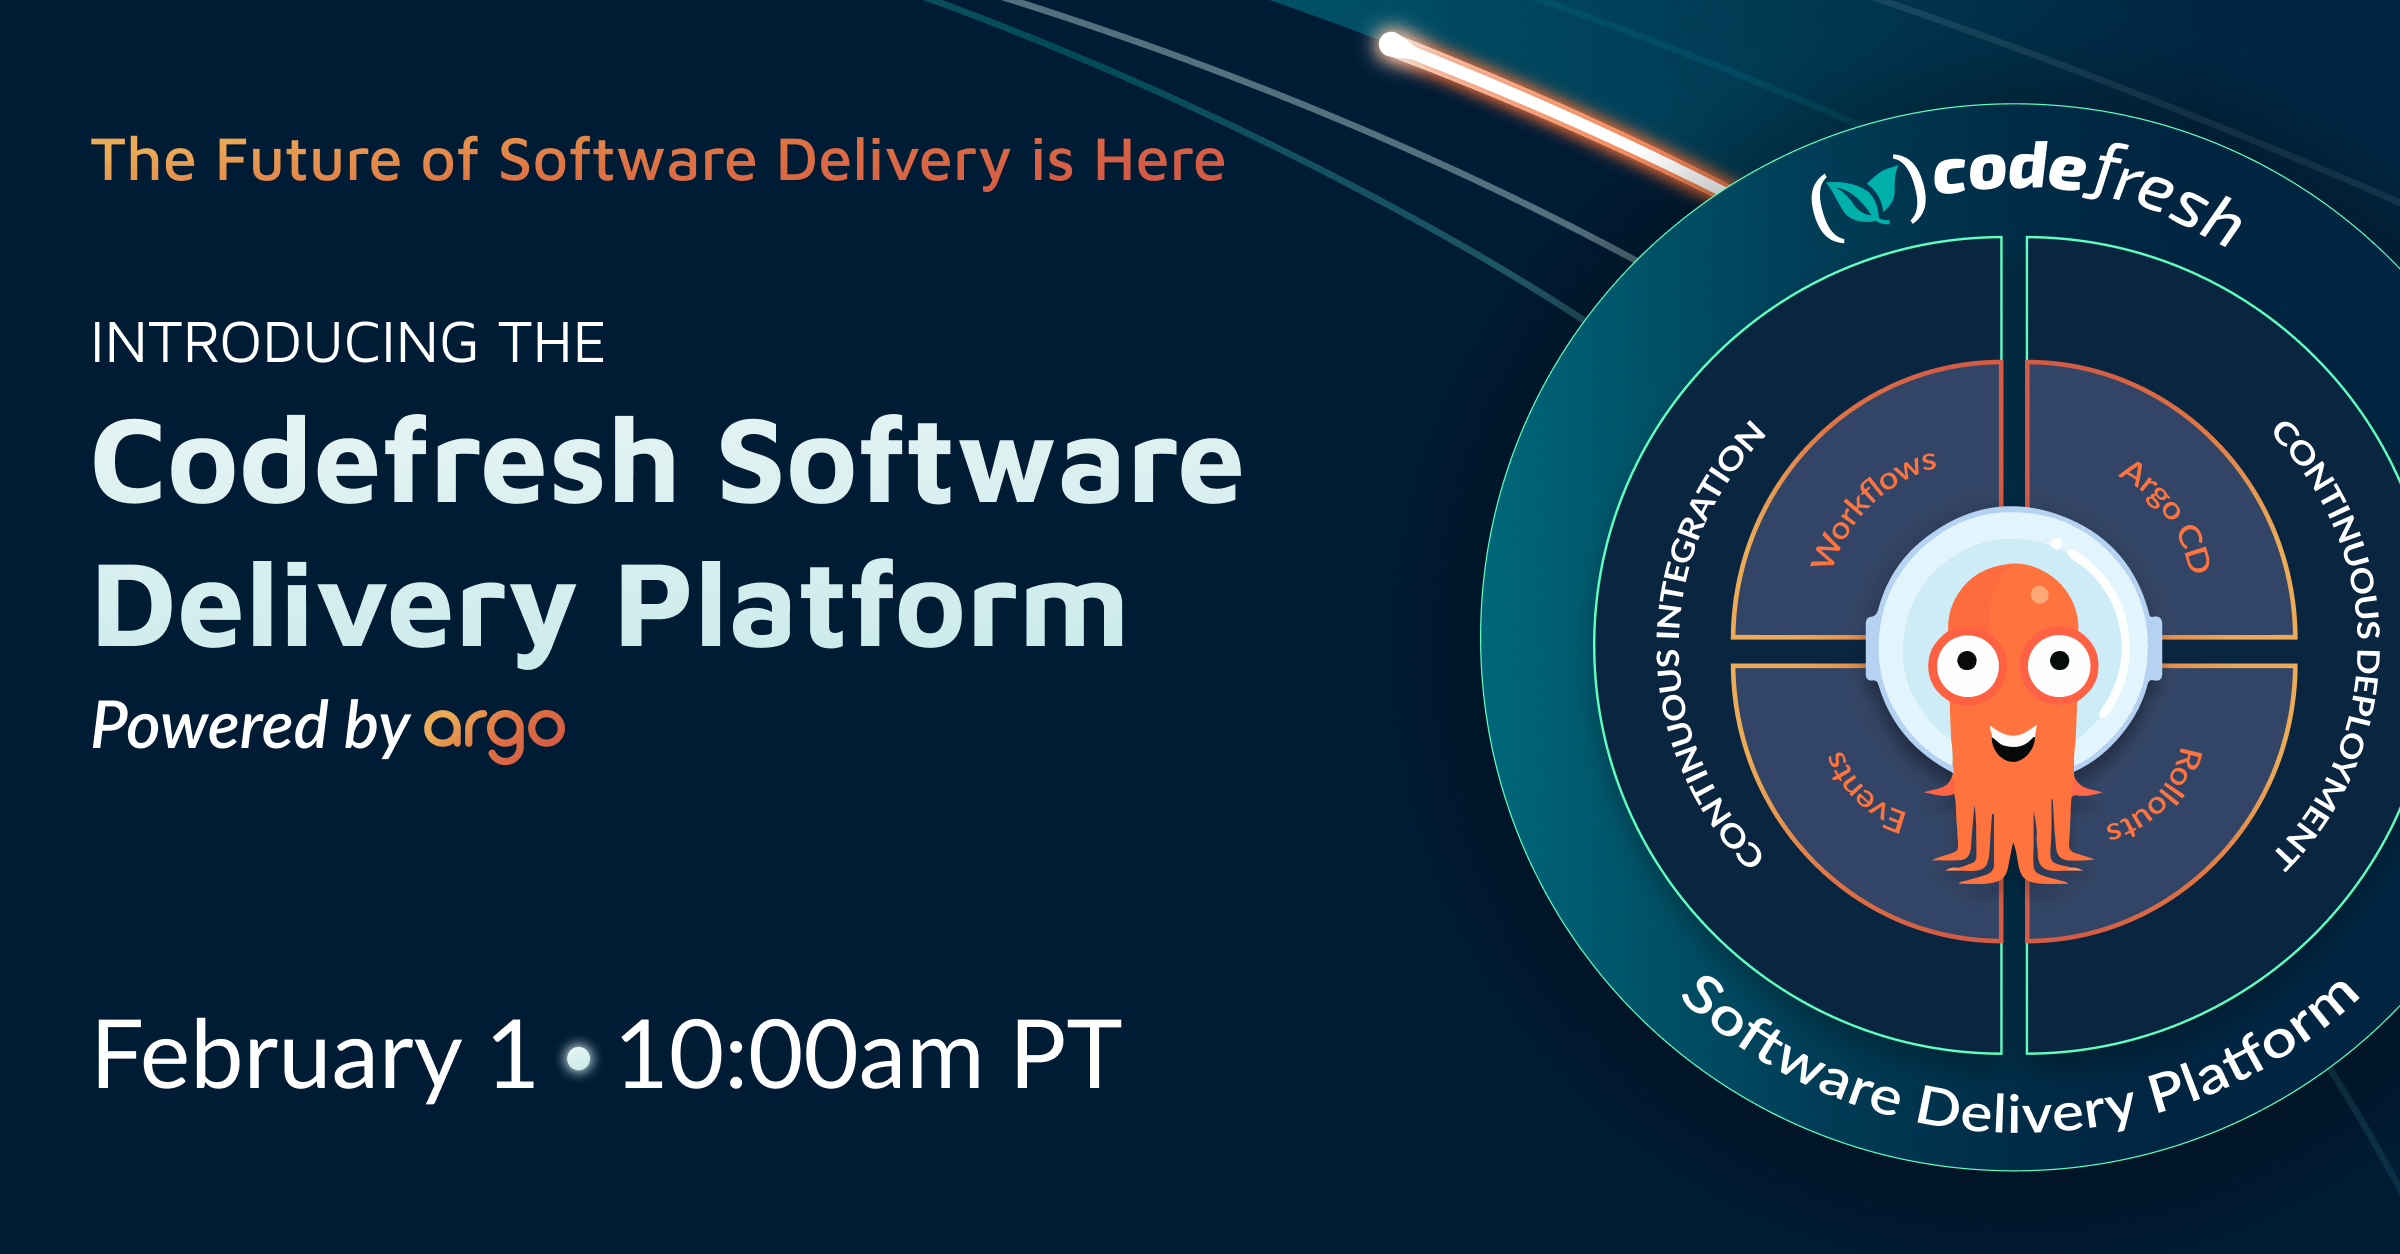 Introducing the Codefresh Software Delivery Platform Powered by Argo